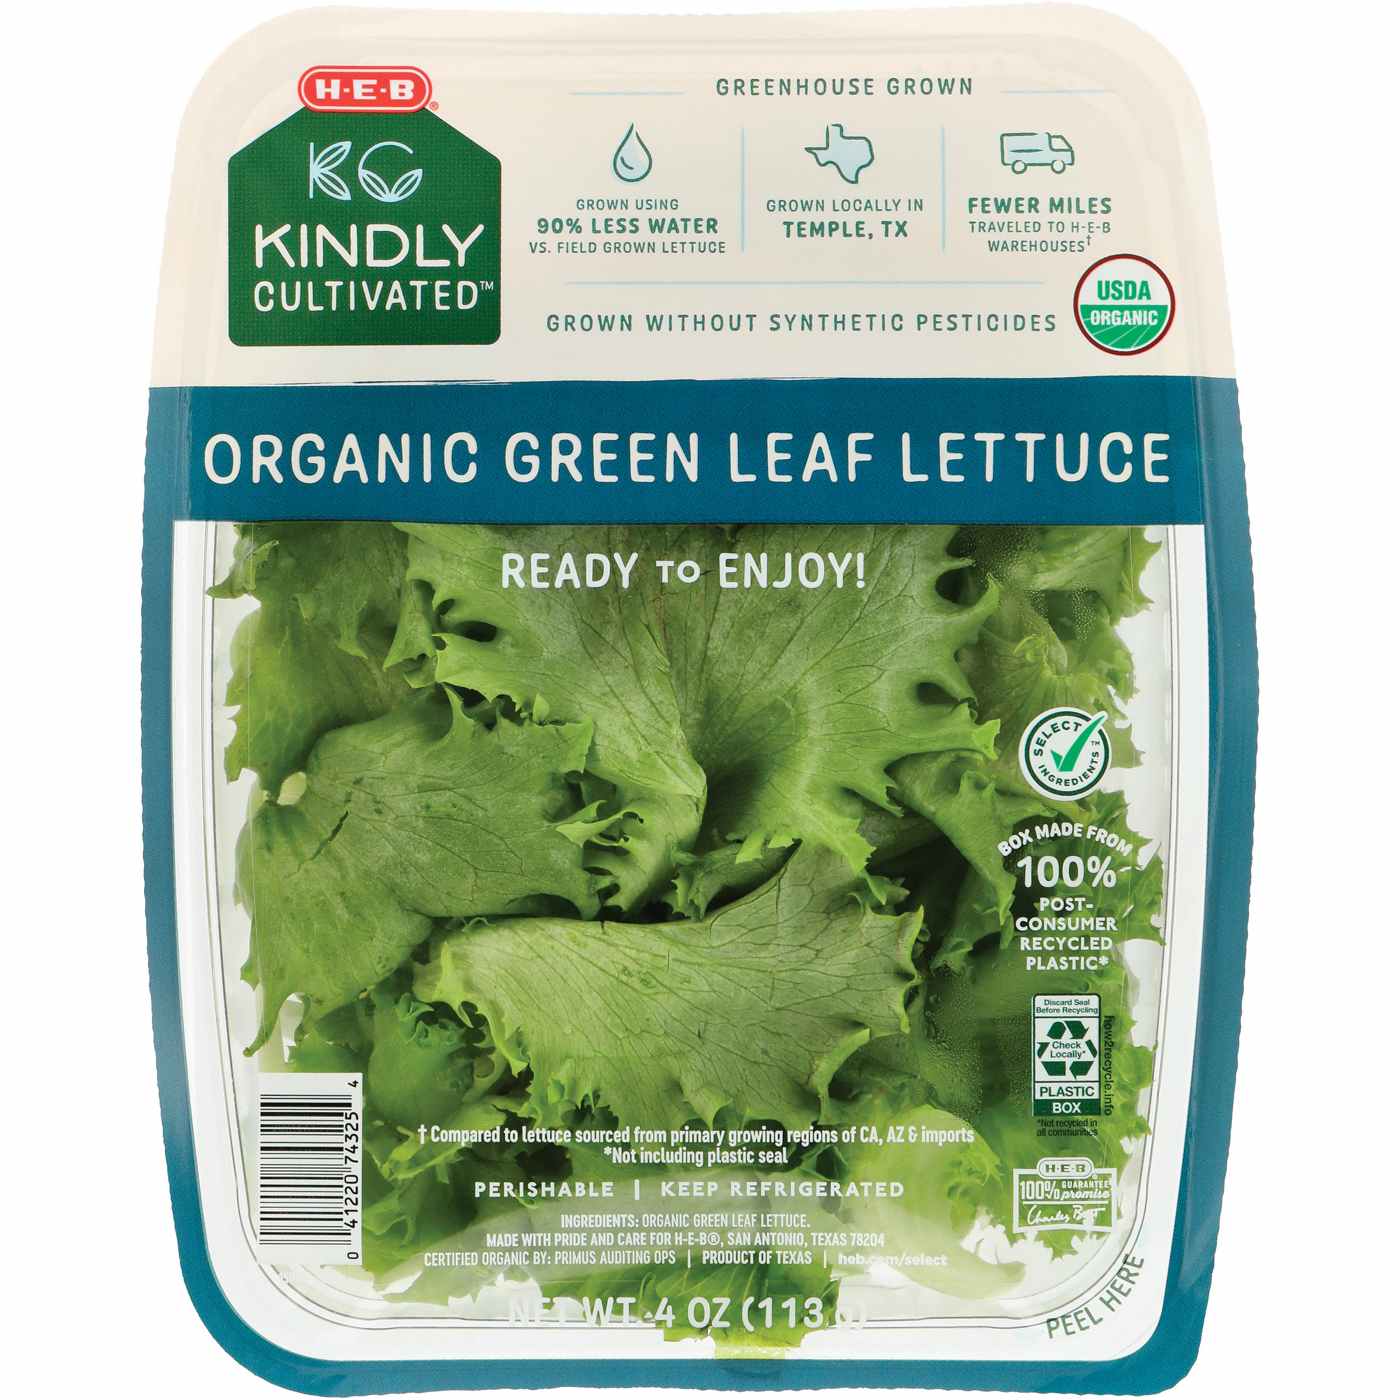 H-E-B Kindly Cultivated Fresh Organic Green Leaf Lettuce ; image 1 of 2